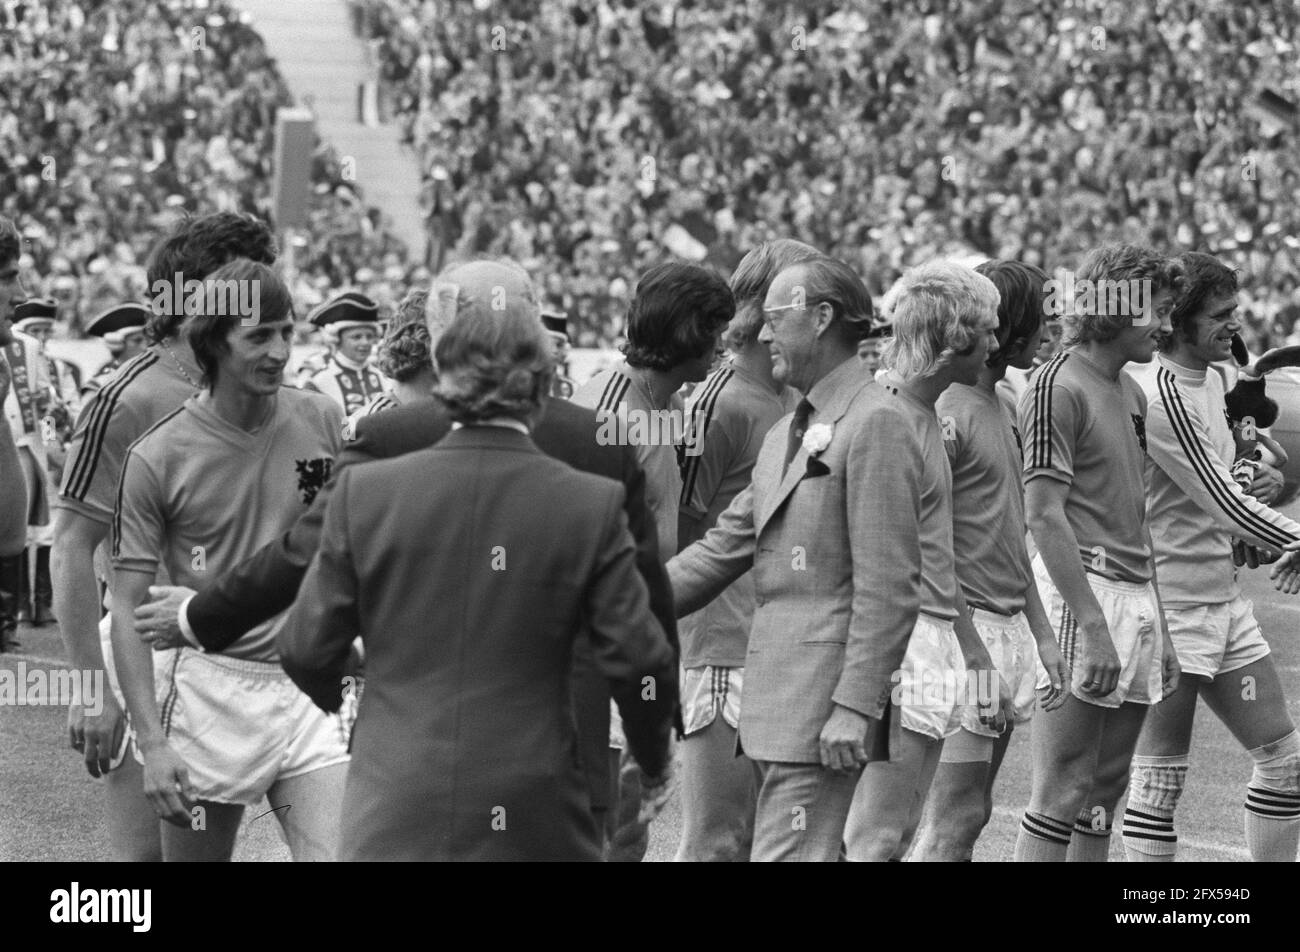 1974 World Cup final in Munich, West Germany v. Netherlands 2-1; Dutch players are introduced to president before kickoff, July 7, 1974, PLAYERS, finals, sports, soccer, world championships, The Netherlands, 20th century press agency photo, news to remember, documentary, historic photography 1945-1990, visual stories, human history of the Twentieth Century, capturing moments in time Stock Photo